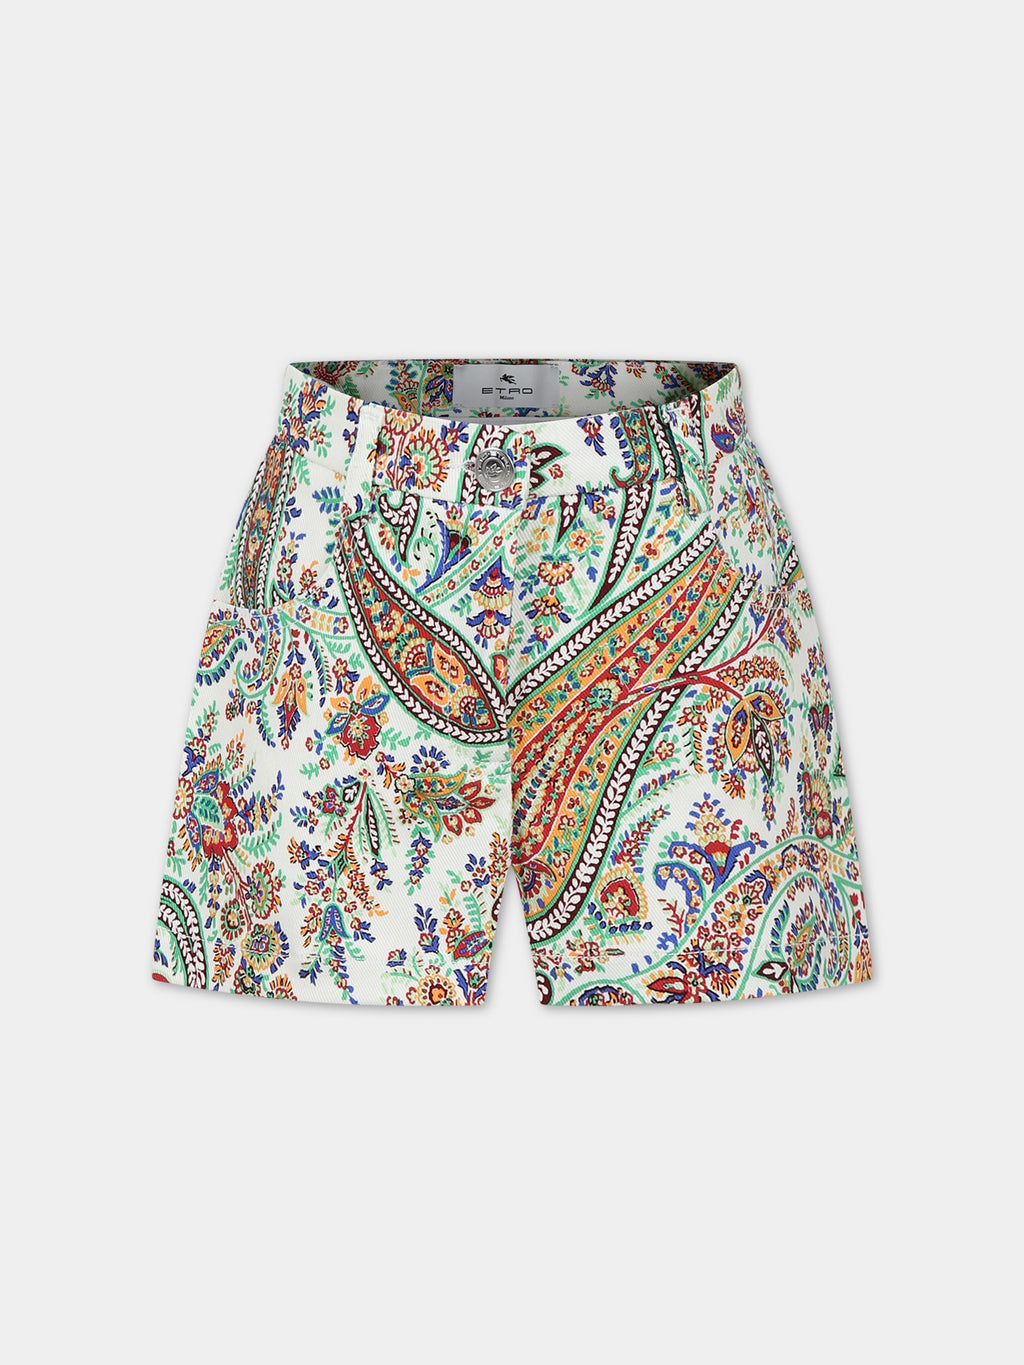 Ivory shorts for girl with paisley pattern